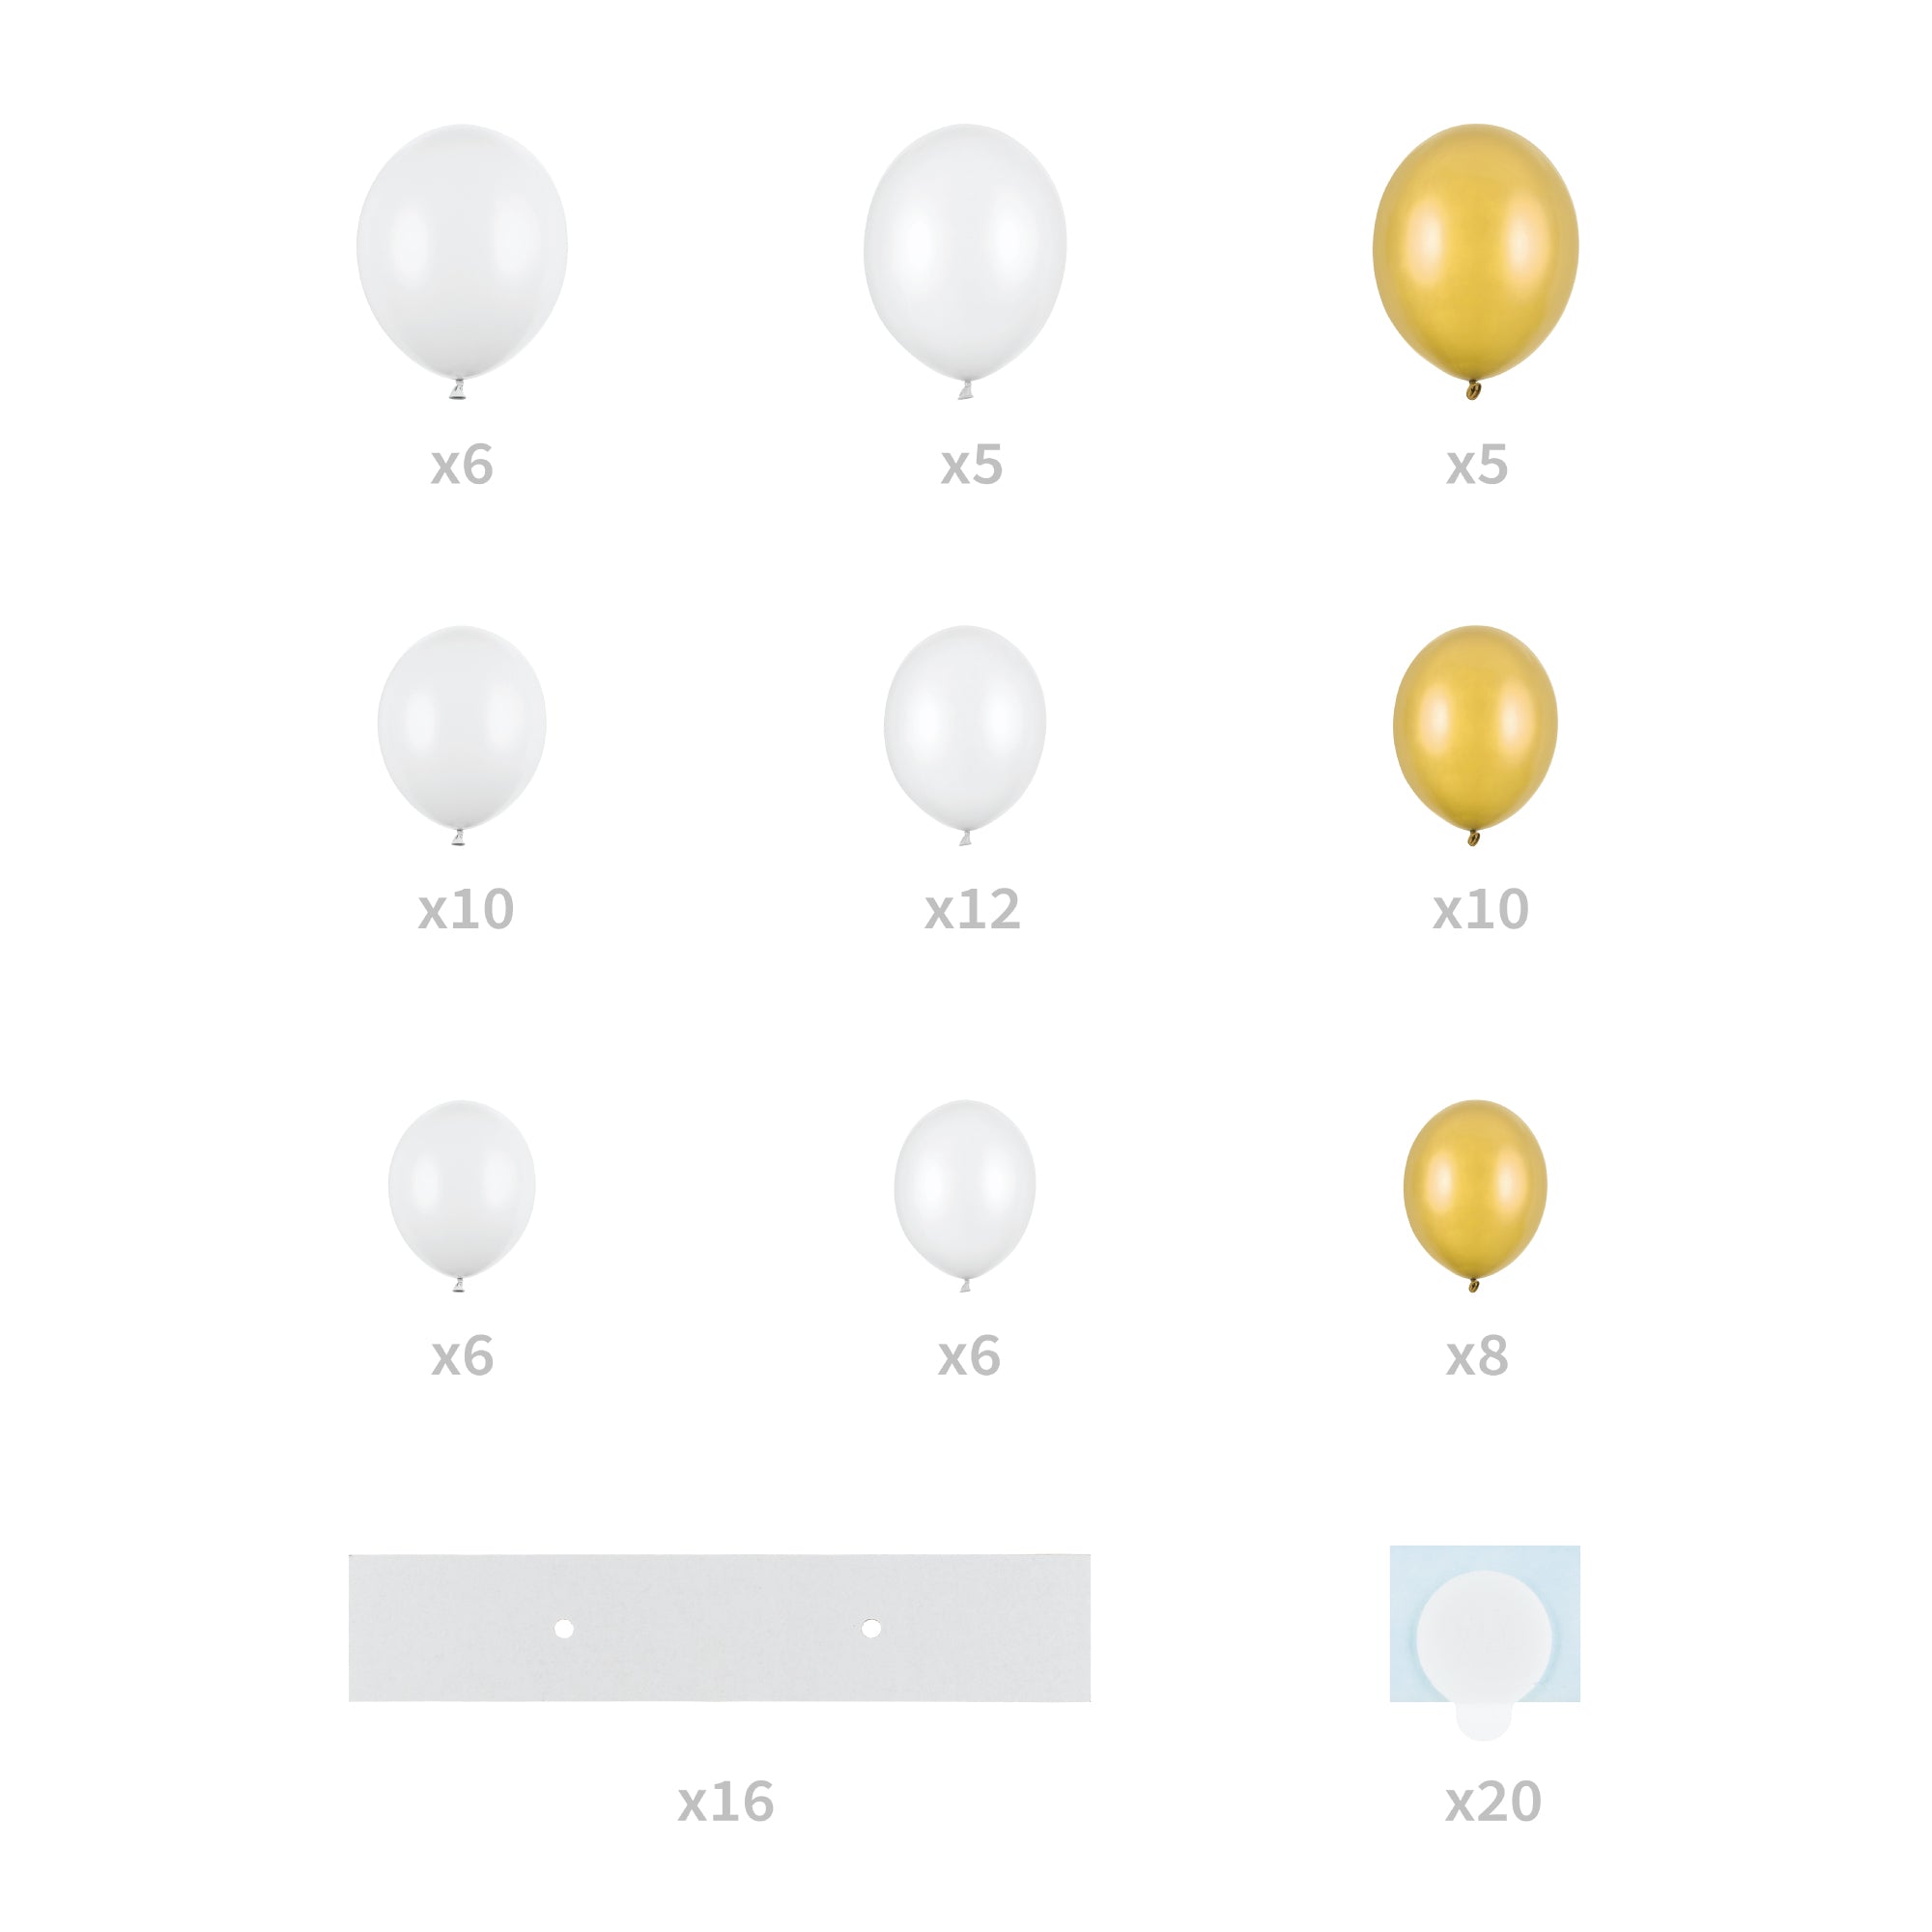 White & Gold Heart Shaped Balloon Garland Kit 68pc | The Party Darling